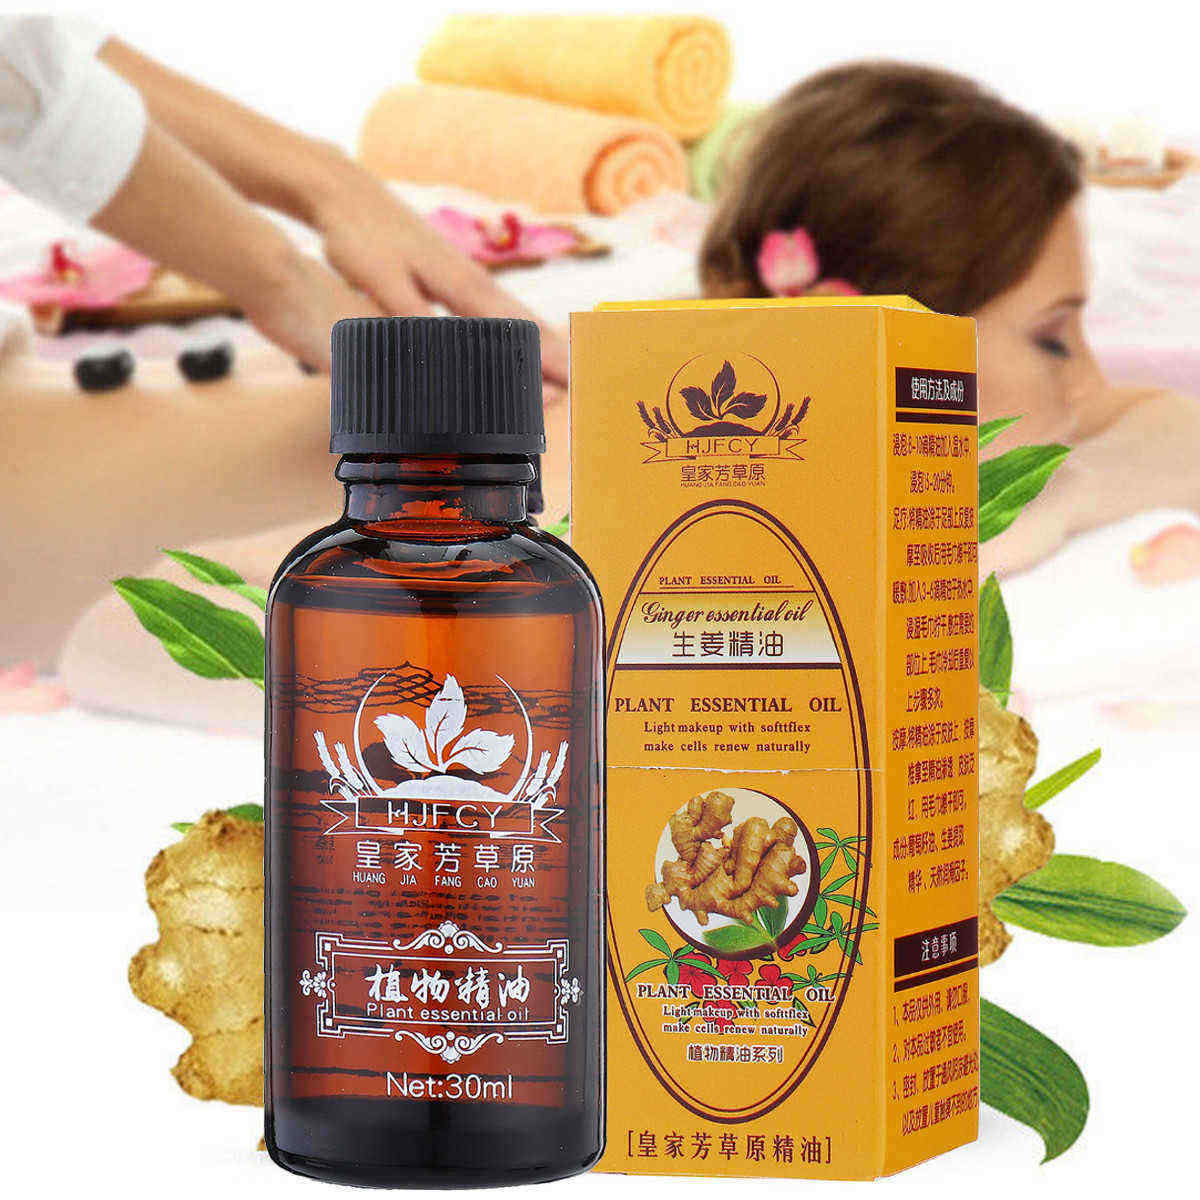 100-Natural-Plant-Therapy-Lymphatic-Drainage-Ginger-Essential-Oil-Anti-Aging-Body-Massage-1335254